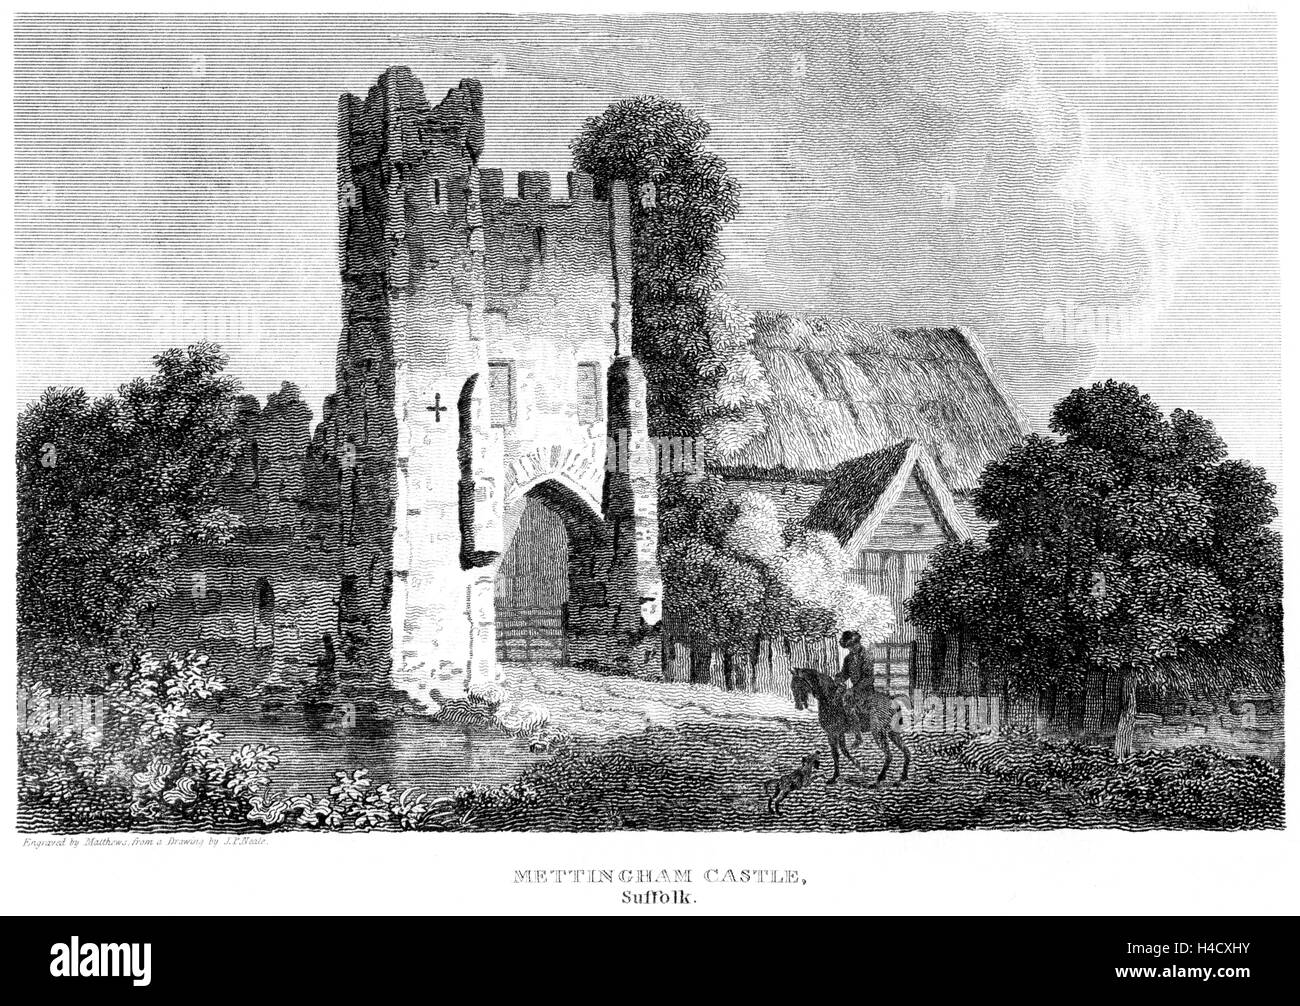 An engraving of Mettingham Castle, Suffolk scanned at high resolution from a book printed in 1812. Believed copyright free. Stock Photo